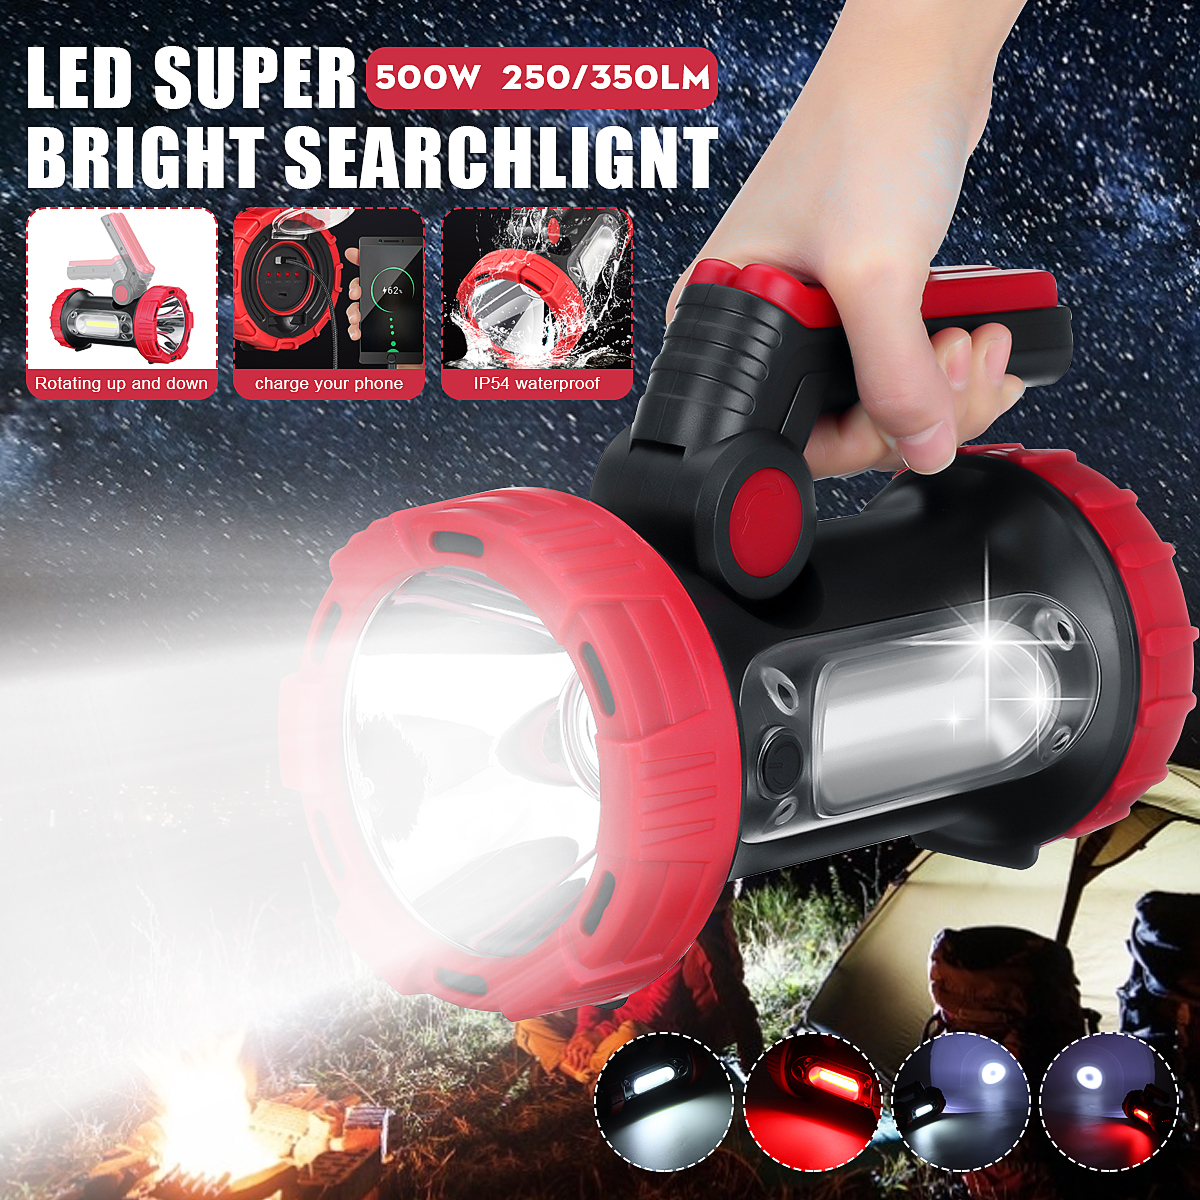 Super-Bright-Searchlight-LED-Portable-Camping-Light-Handheld-Rechargeable-Flashlight-1645851-1